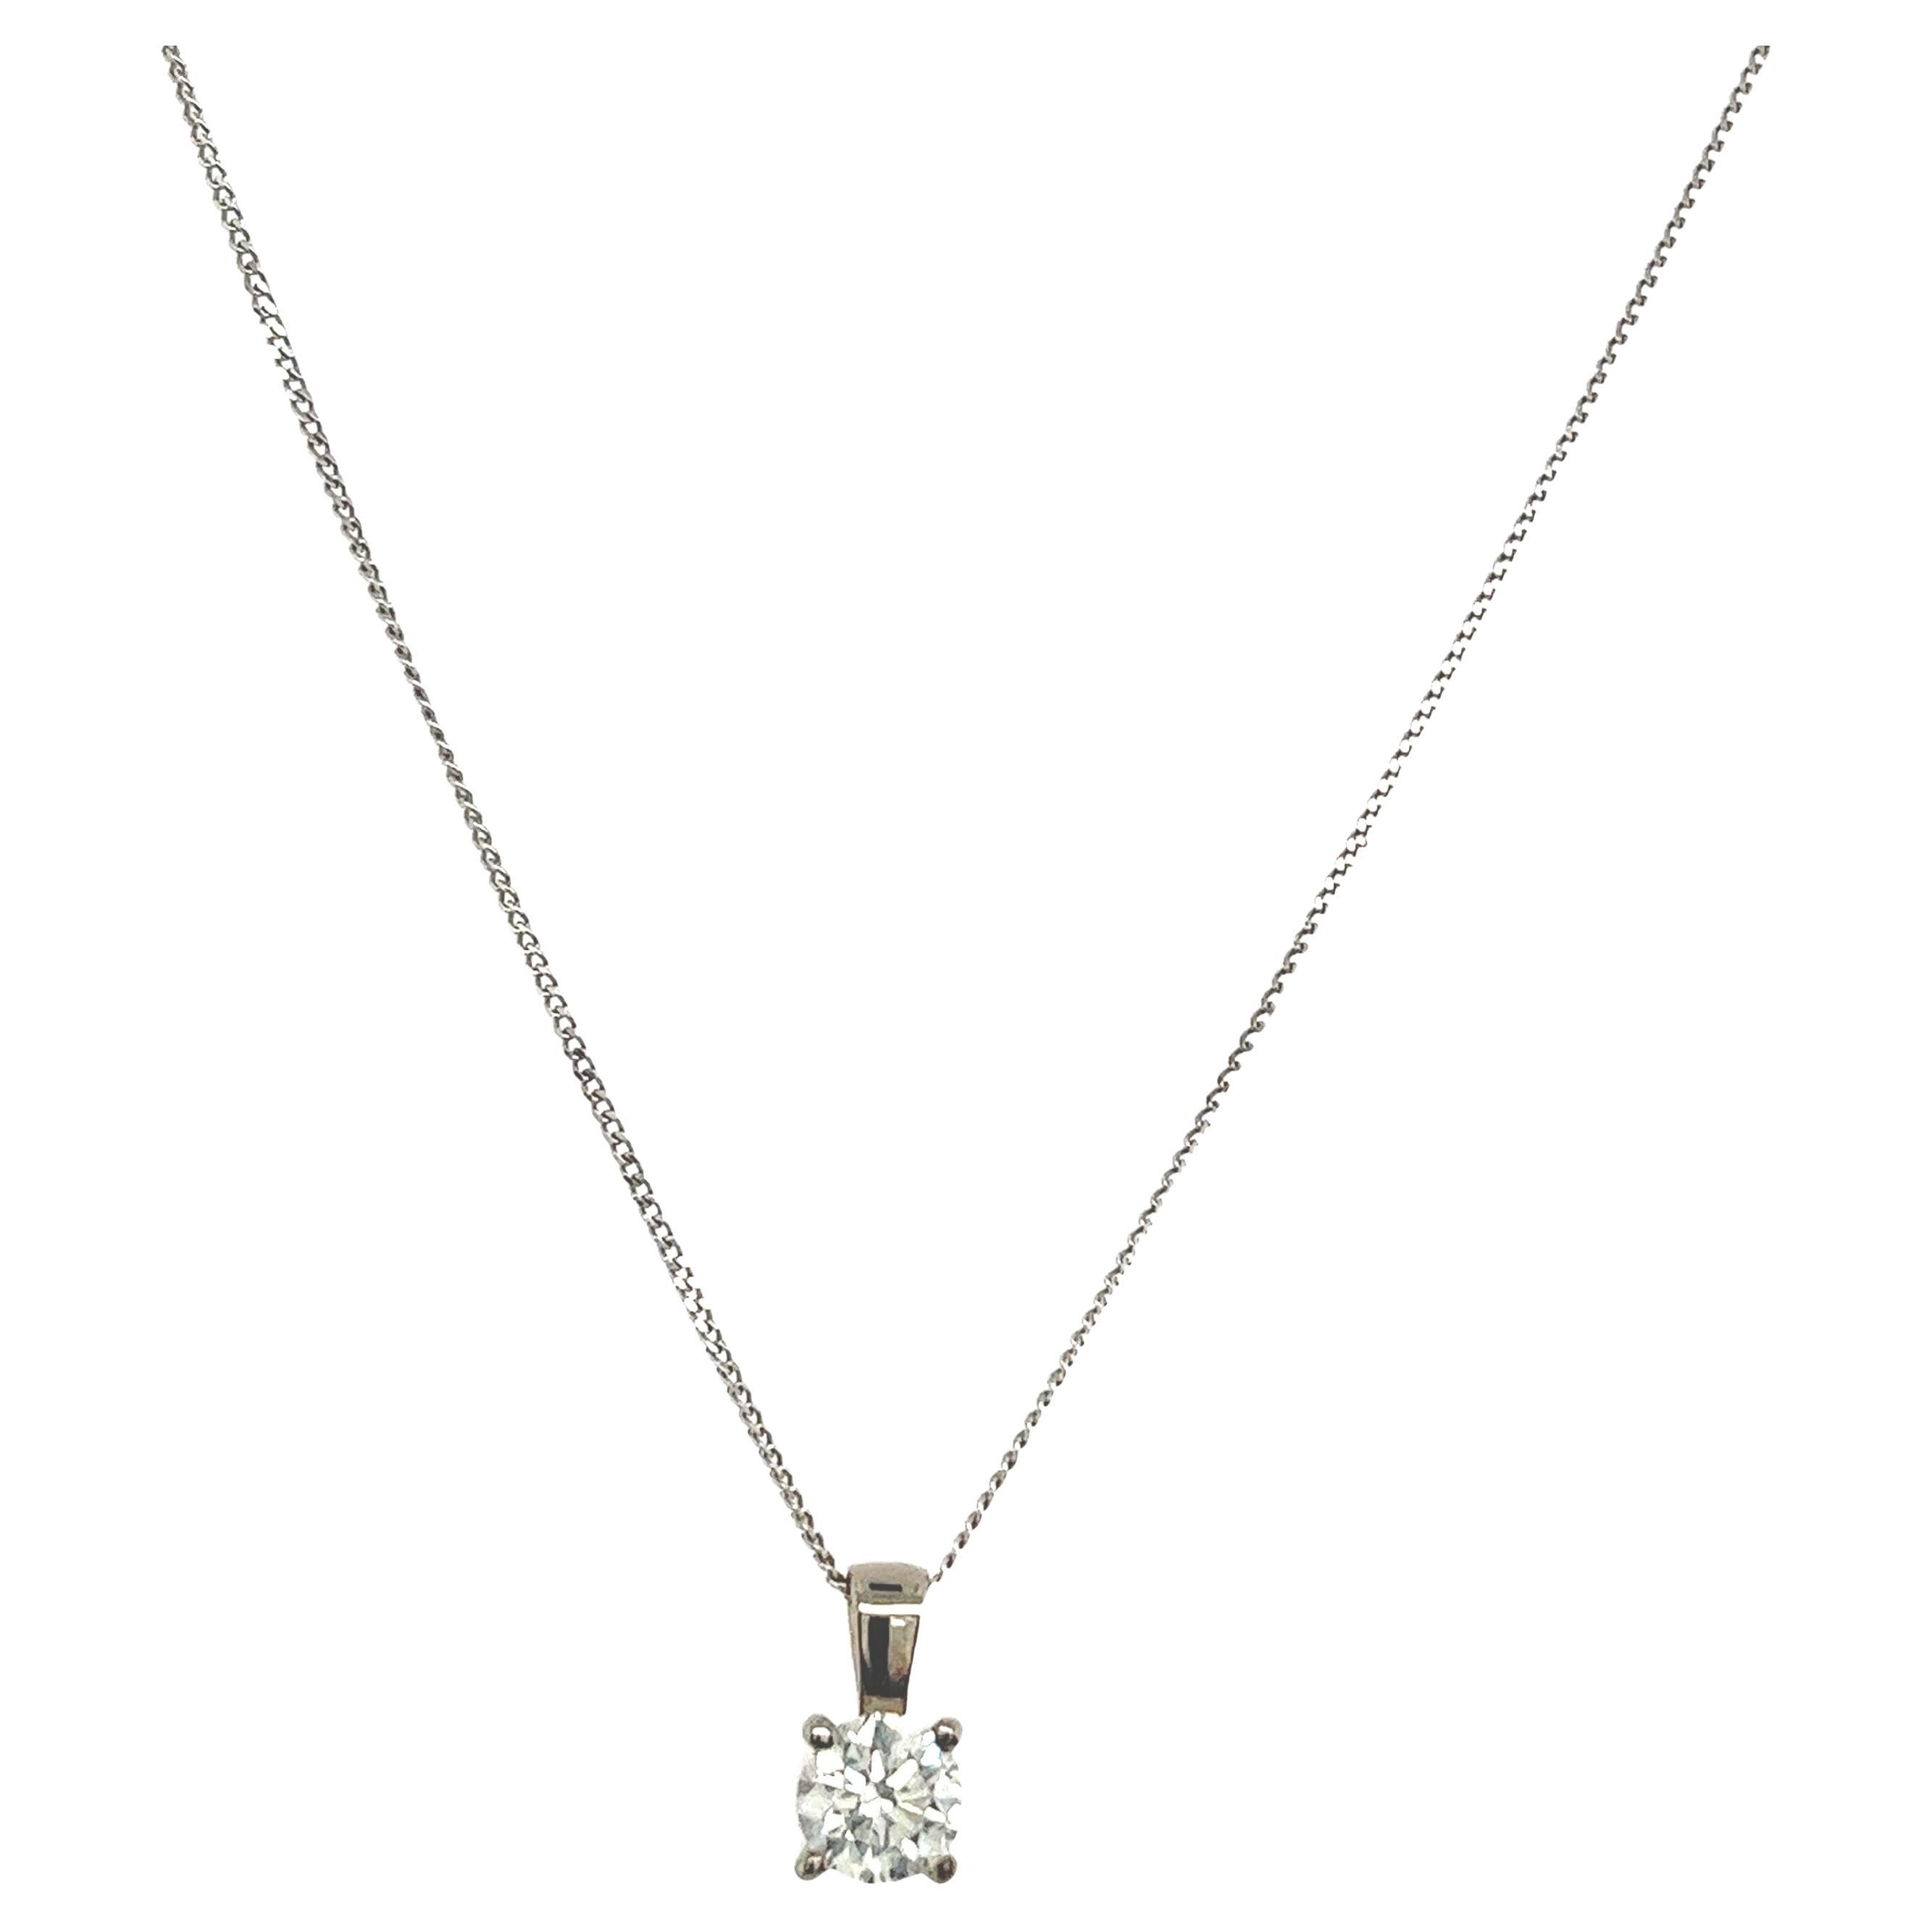 18ct White Gold Diamond Pendant, Suspended from 18" Chain